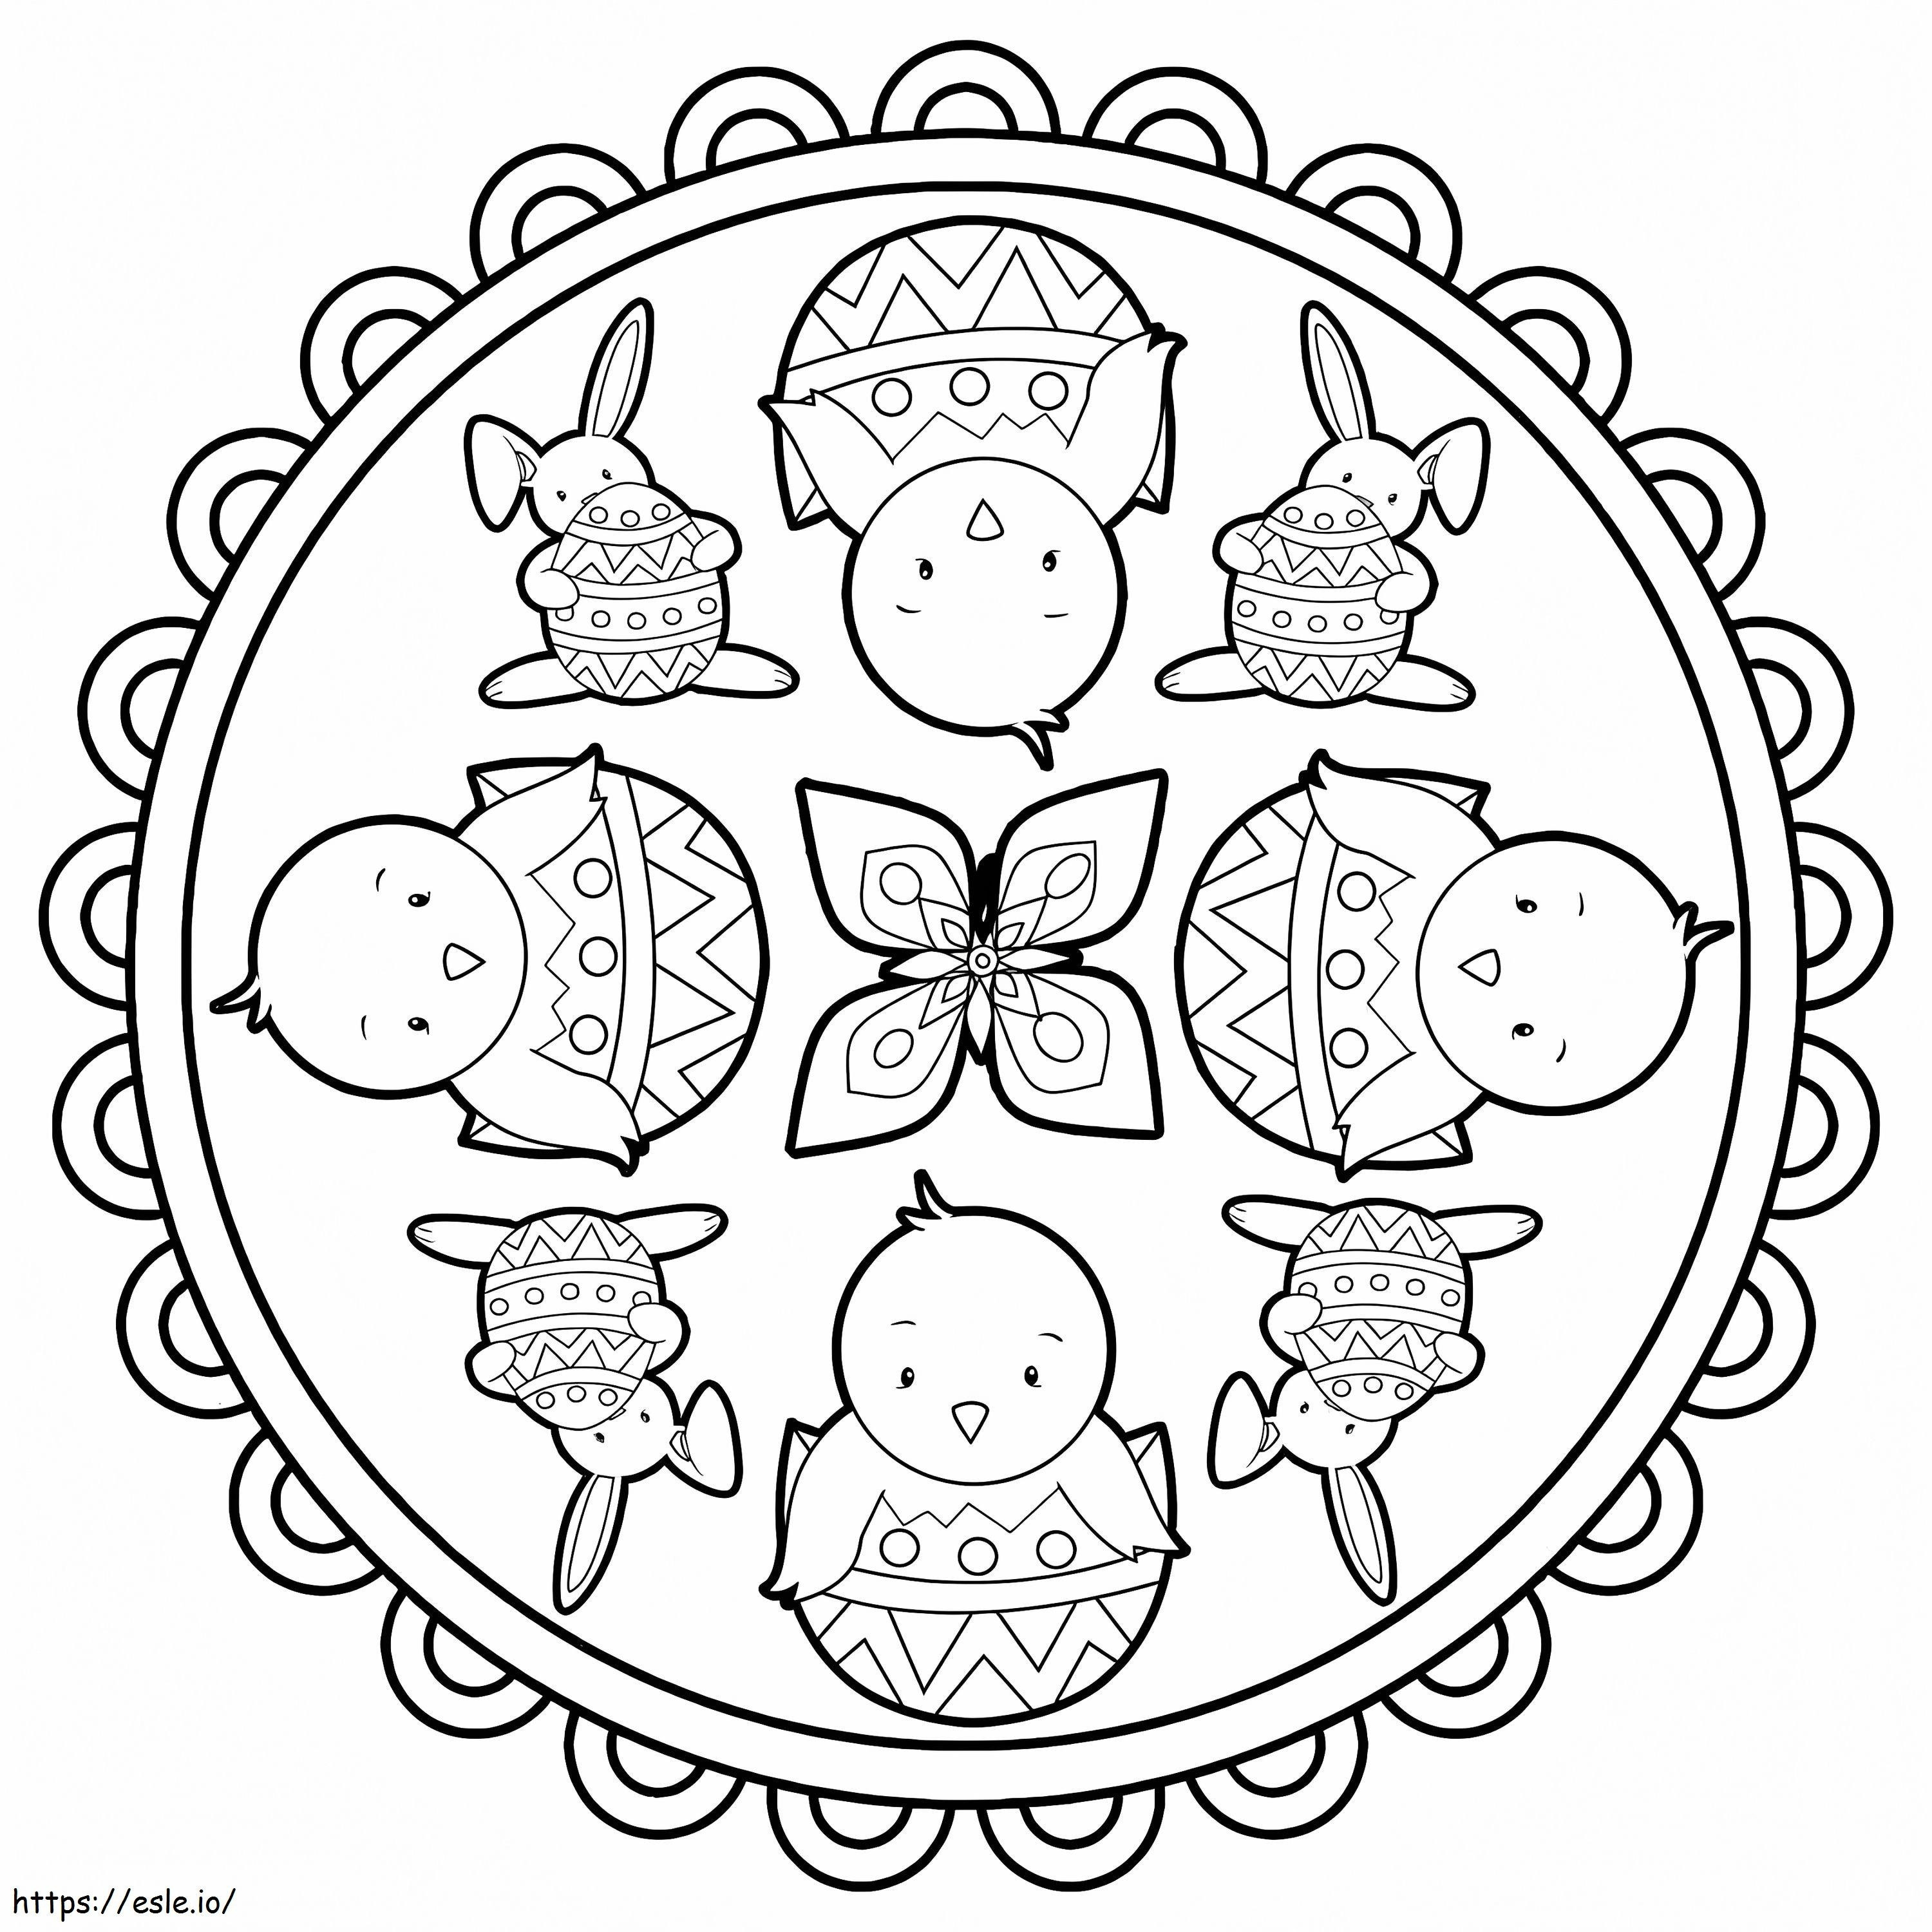 Lovely Easter Mandala 1 coloring page